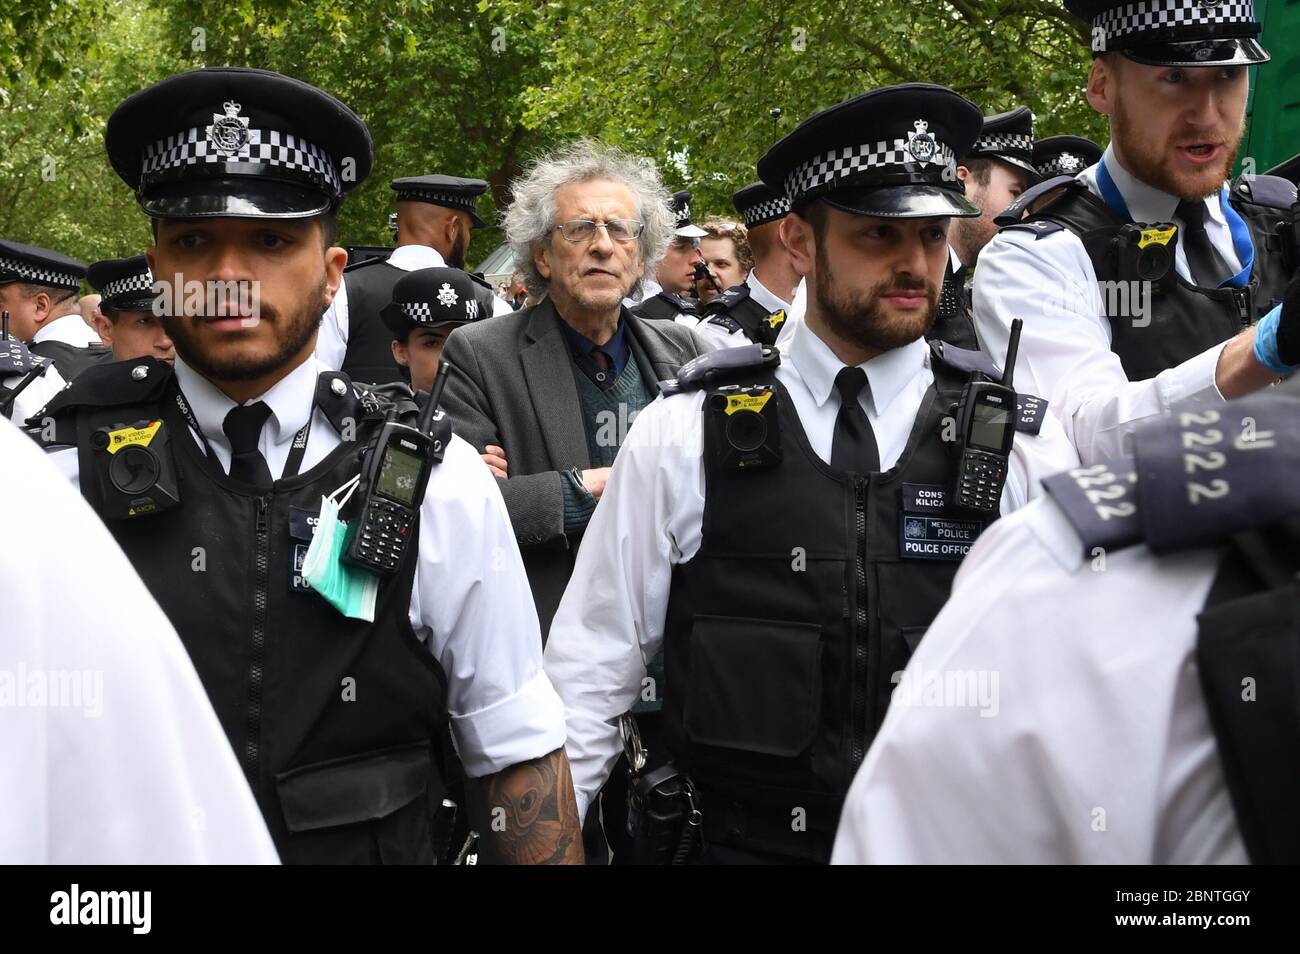 Police lead away Piers Corbyn, brother of former Labour leader Jeremy Corbyn, as protesters gather in breach of lockdown rules in Hyde Park in London after the introduction of measures to bring the country out of lockdown. Stock Photo